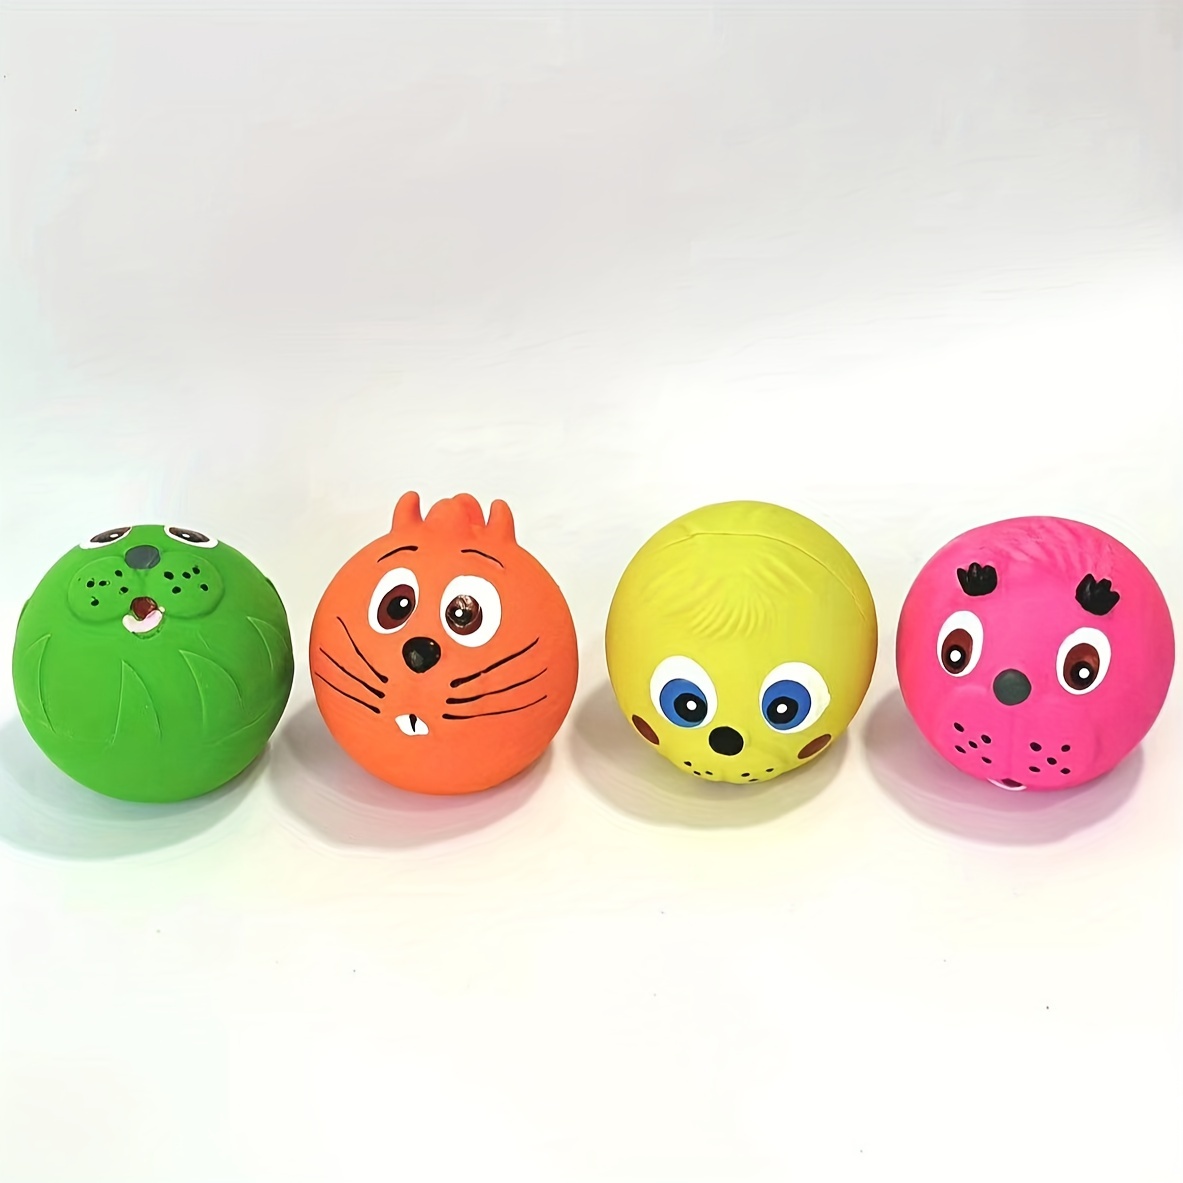 

Interactive Squeaky Dog Toy - Durable Natural Rubber Chew Ball For Small Breeds, Cartoon Design, Teeth Cleaning & Training Aid